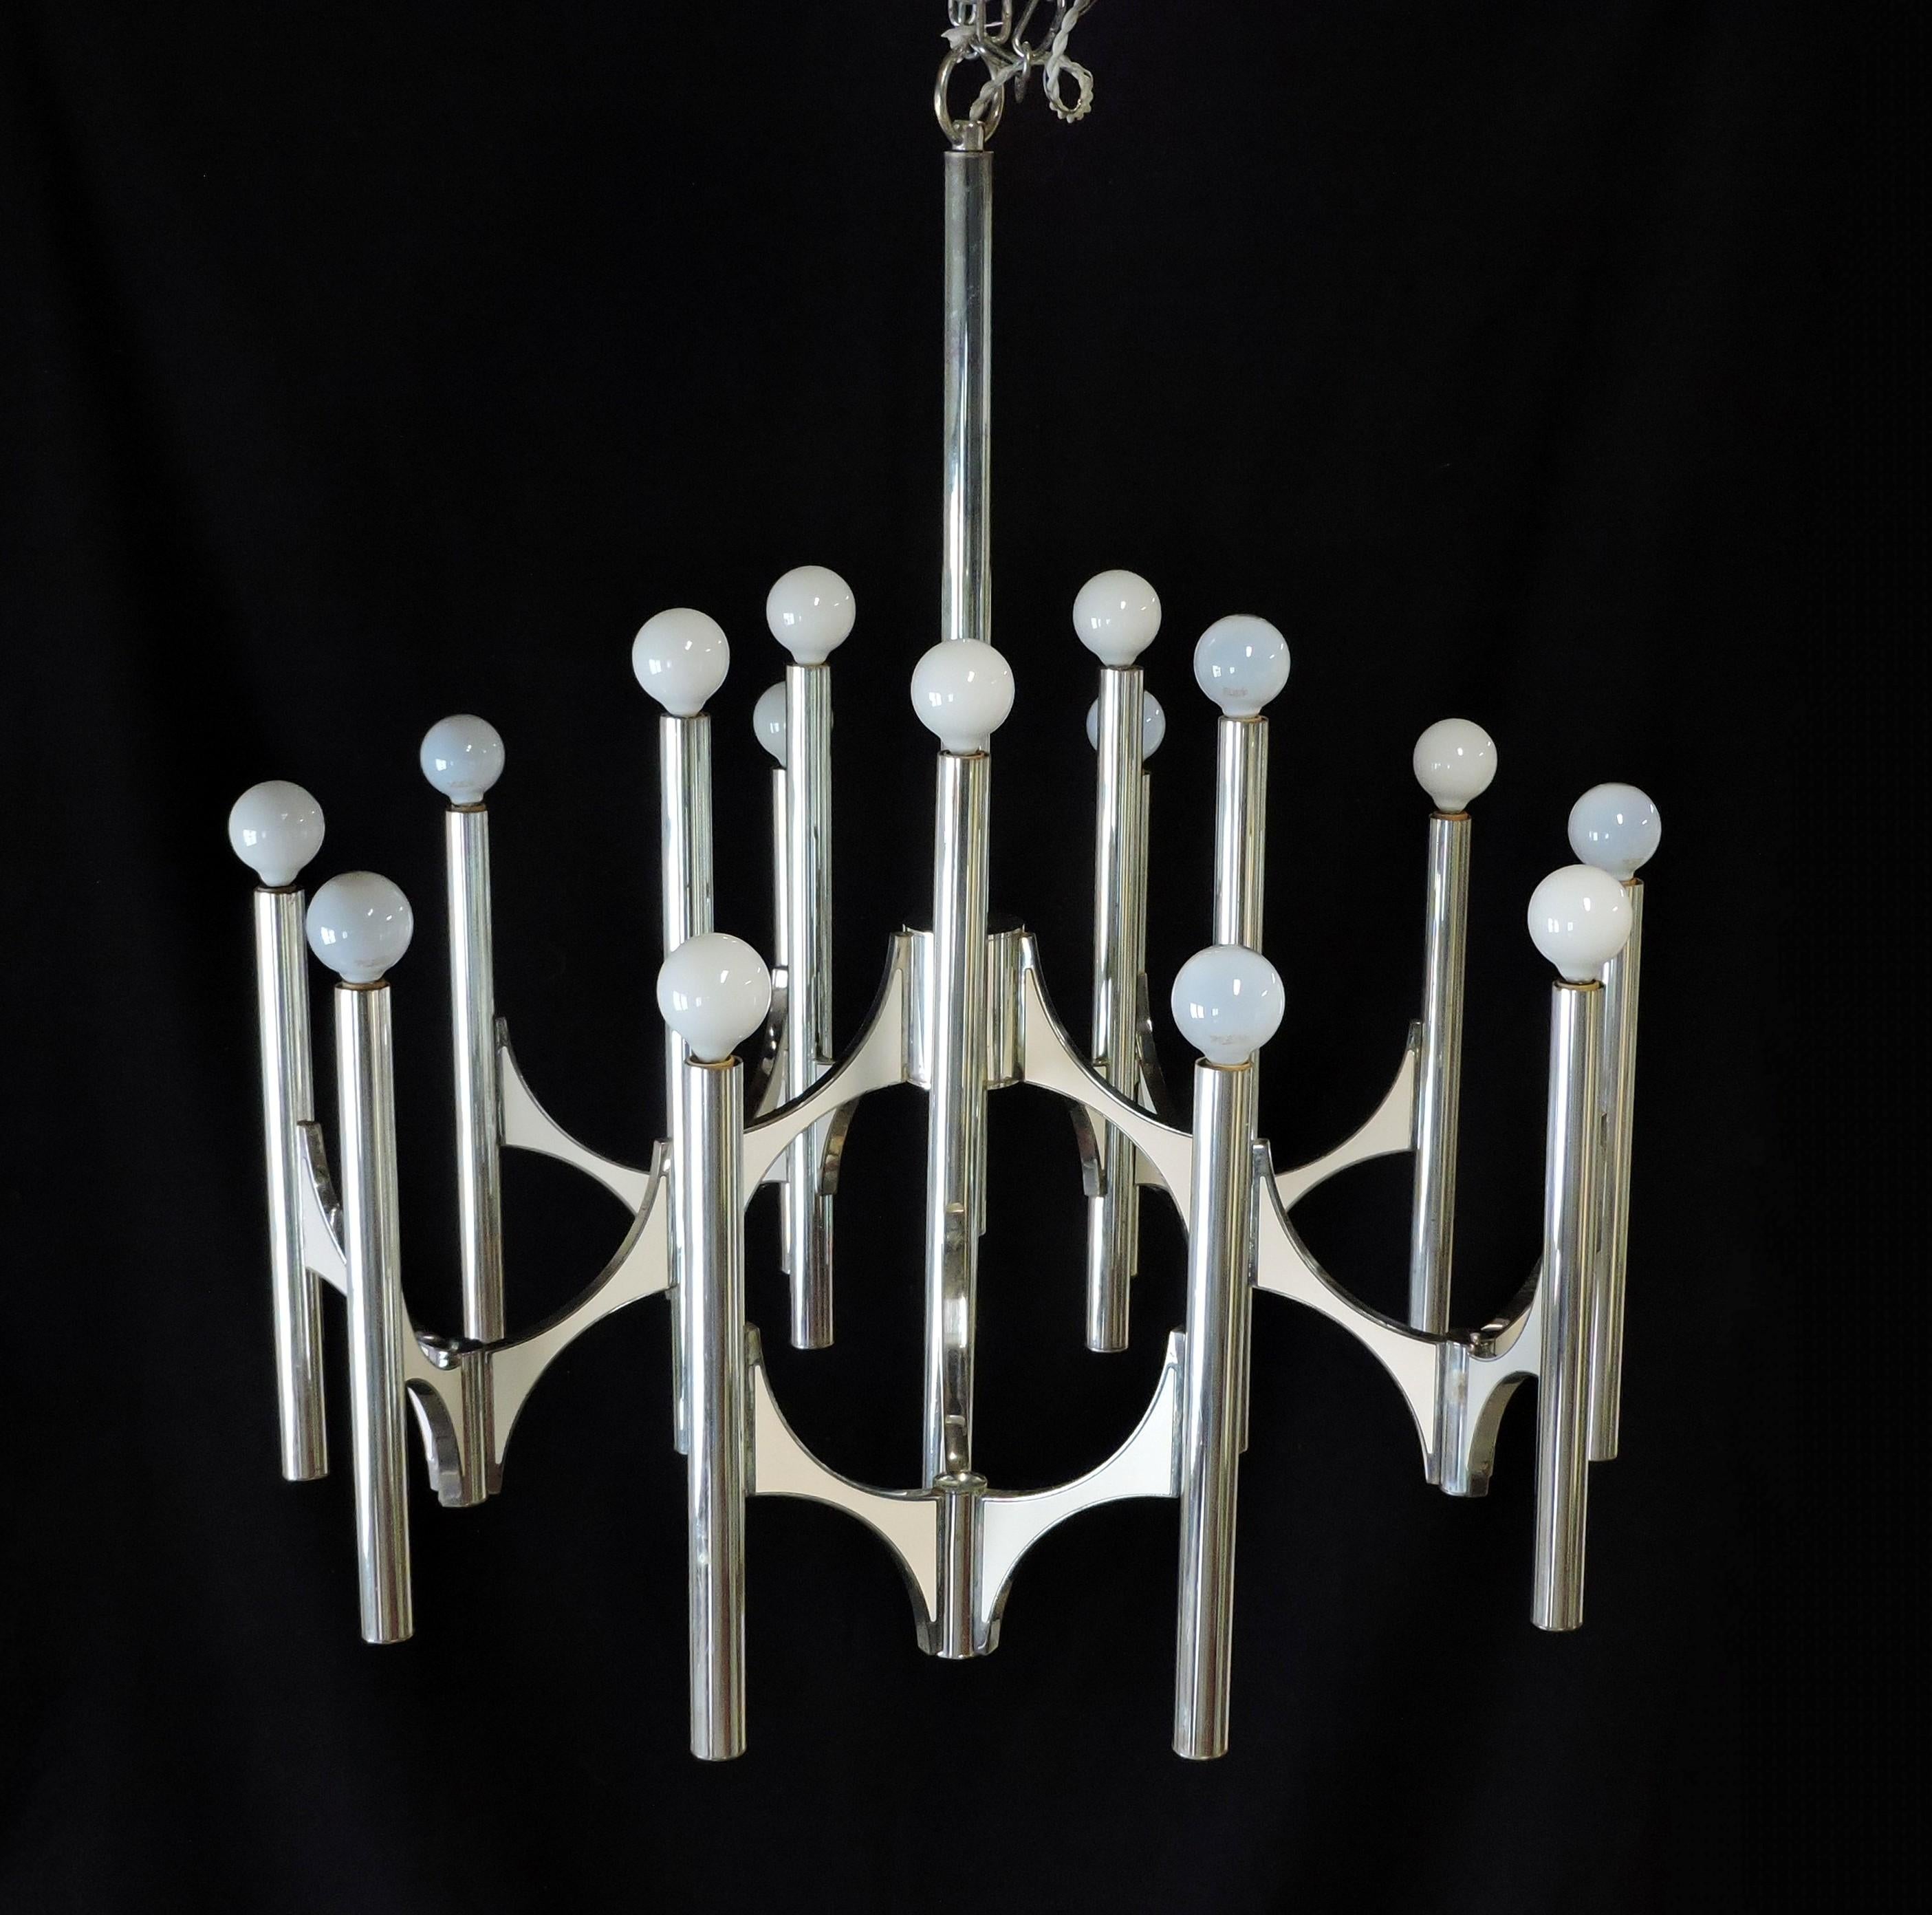 Beautiful and large chandelier designed by Gaetano Sciolari. This impressive 15 light fixture has a chrome finish with contrasting white enameled panels on the arms. The original ceiling cap is included.
Approximately 30 inches in diameter by 30